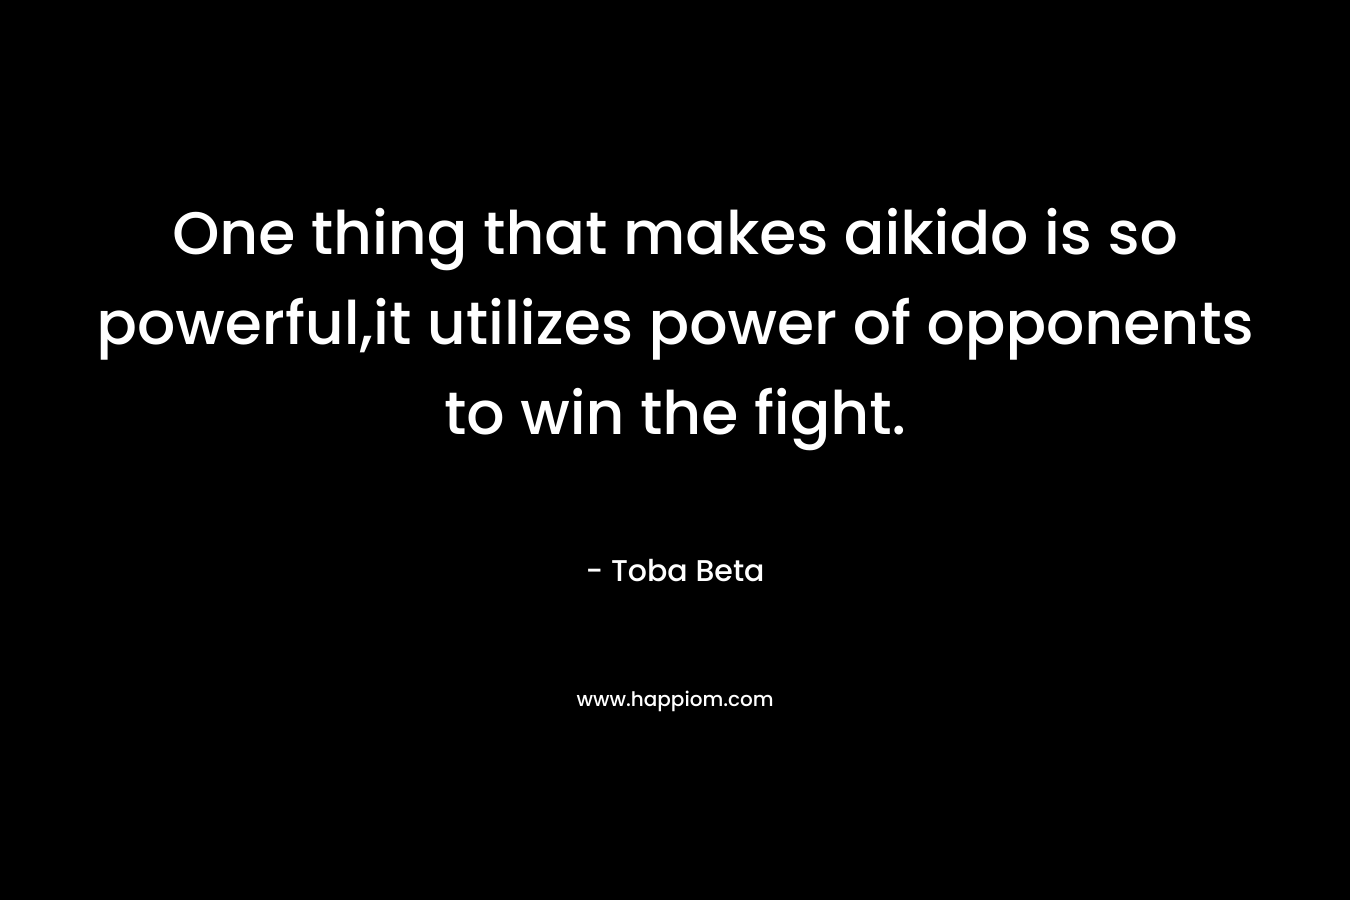 One thing that makes aikido is so powerful,it utilizes power of opponents to win the fight. – Toba Beta